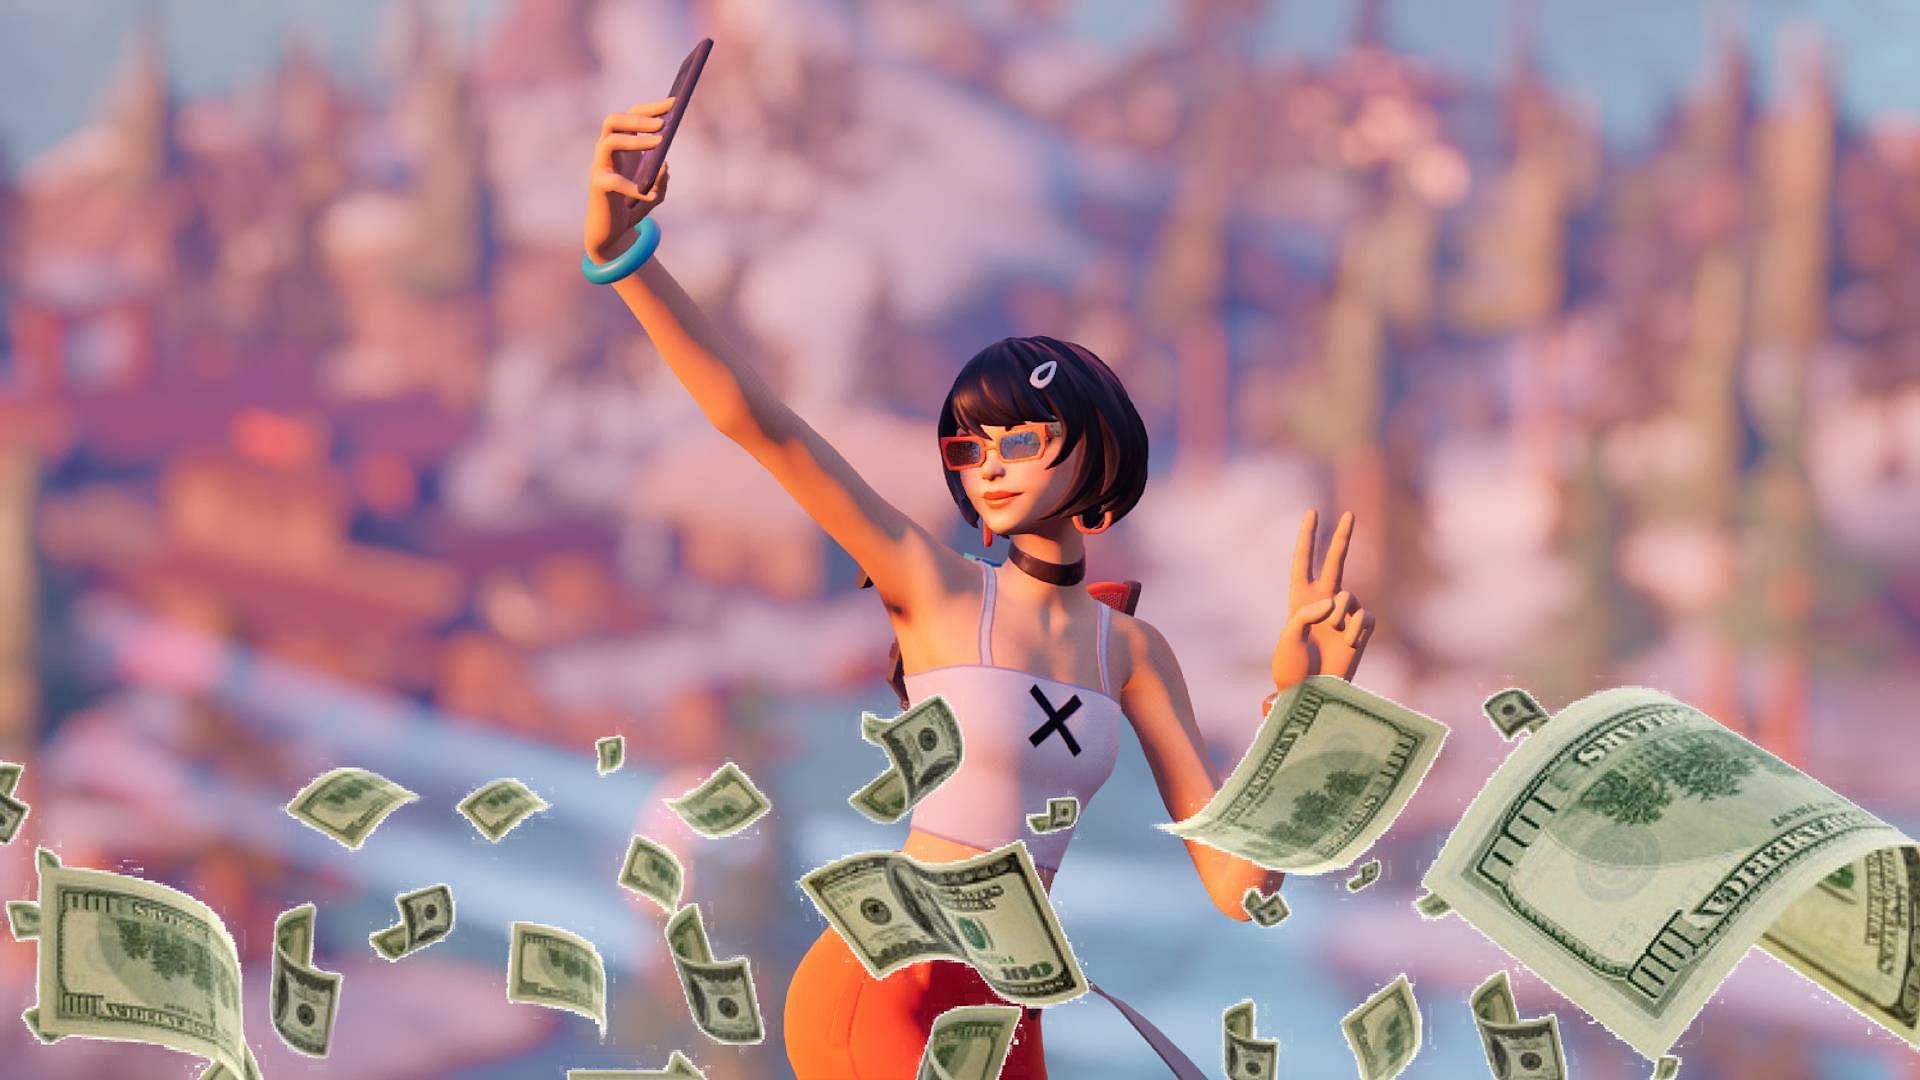 If someone wants to make money from Fortnite, they can do so in different ways (Image via Sportskeeda)